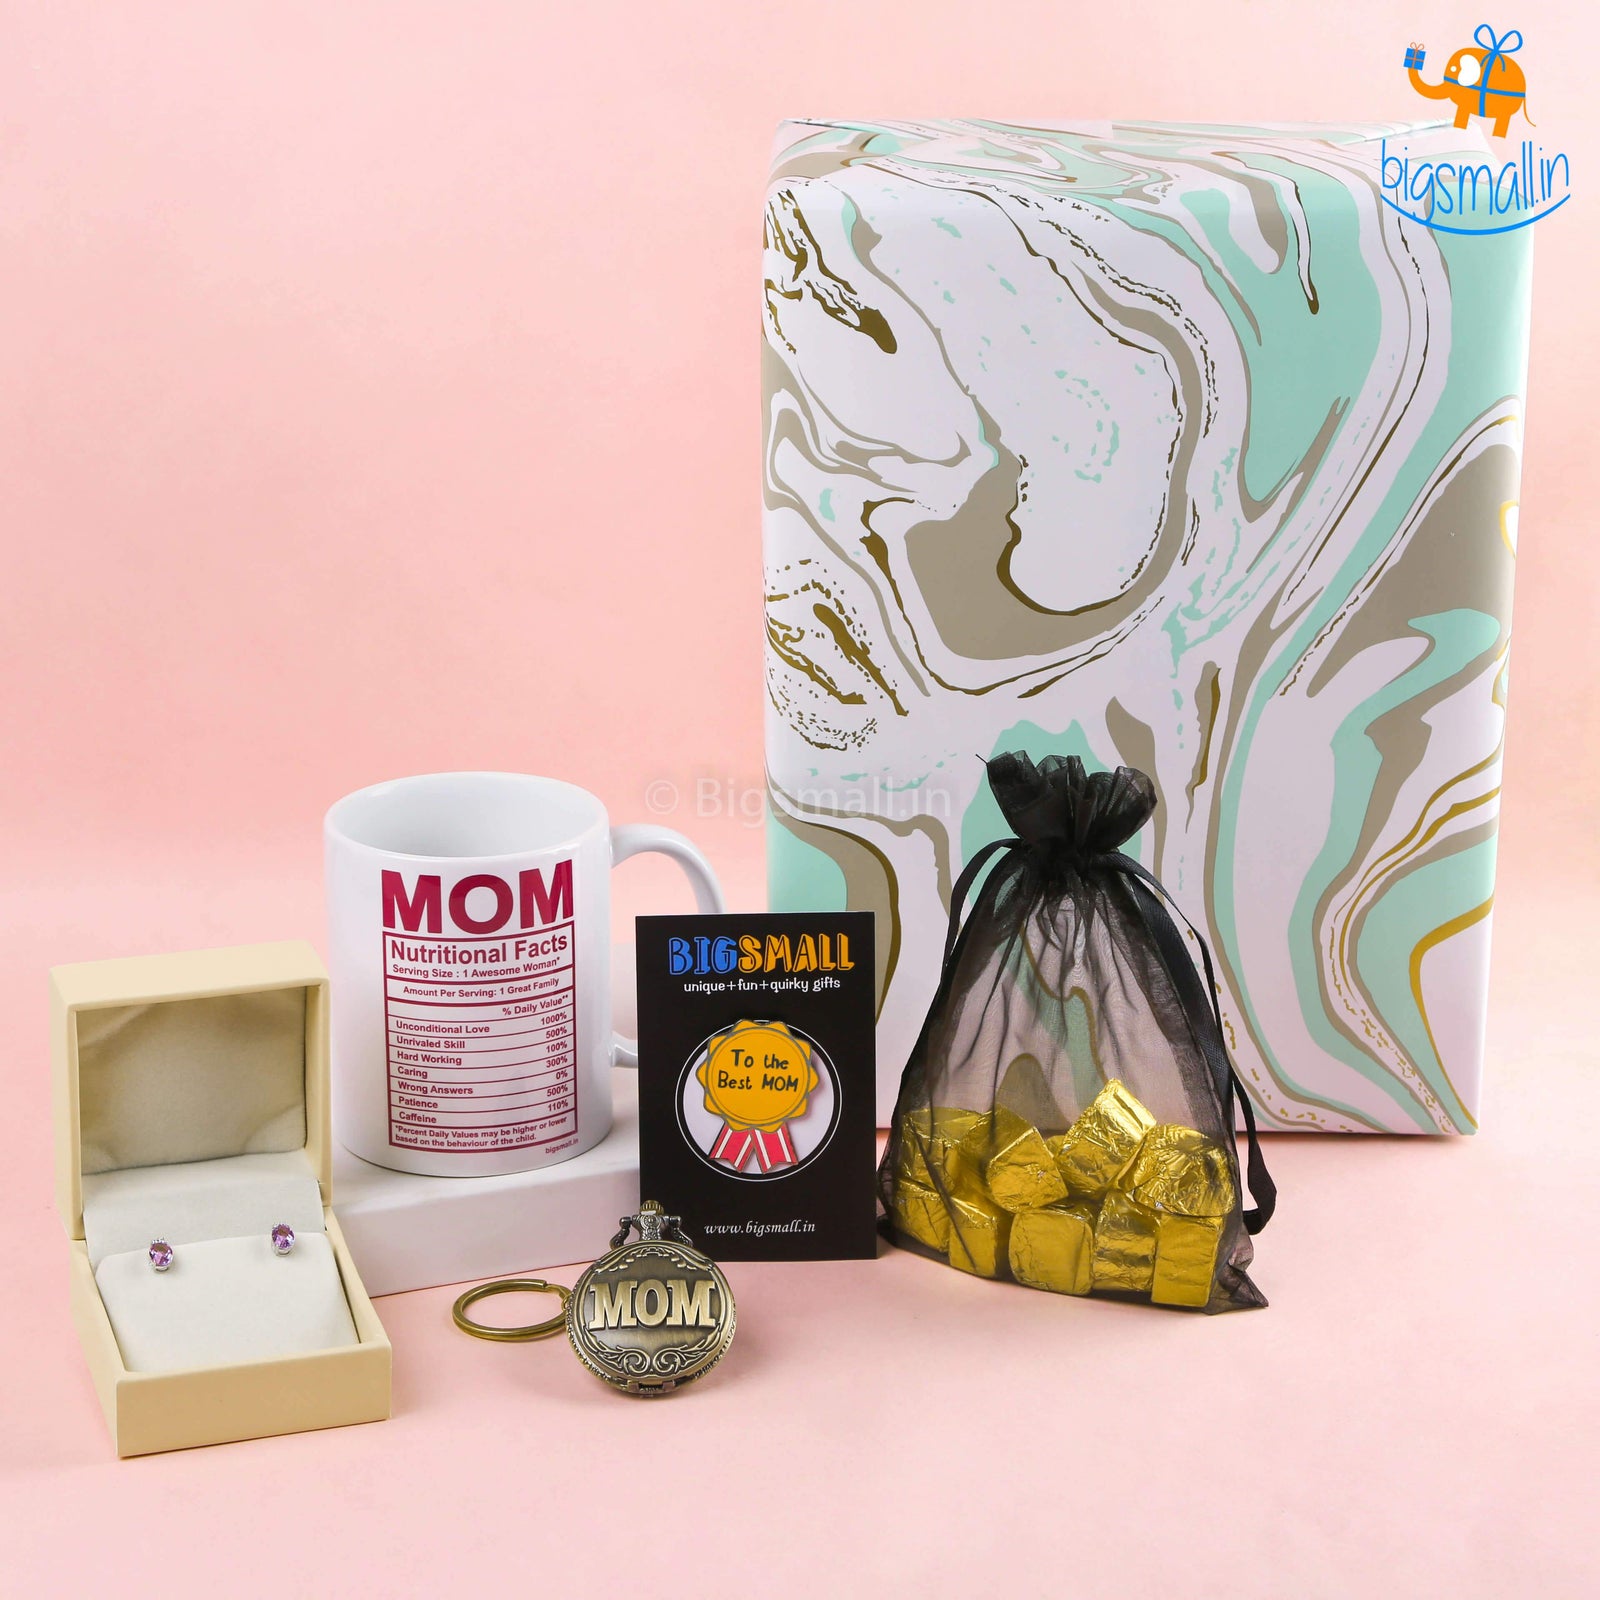 Mother's Day Gift Guide With Ideas for All Budgets